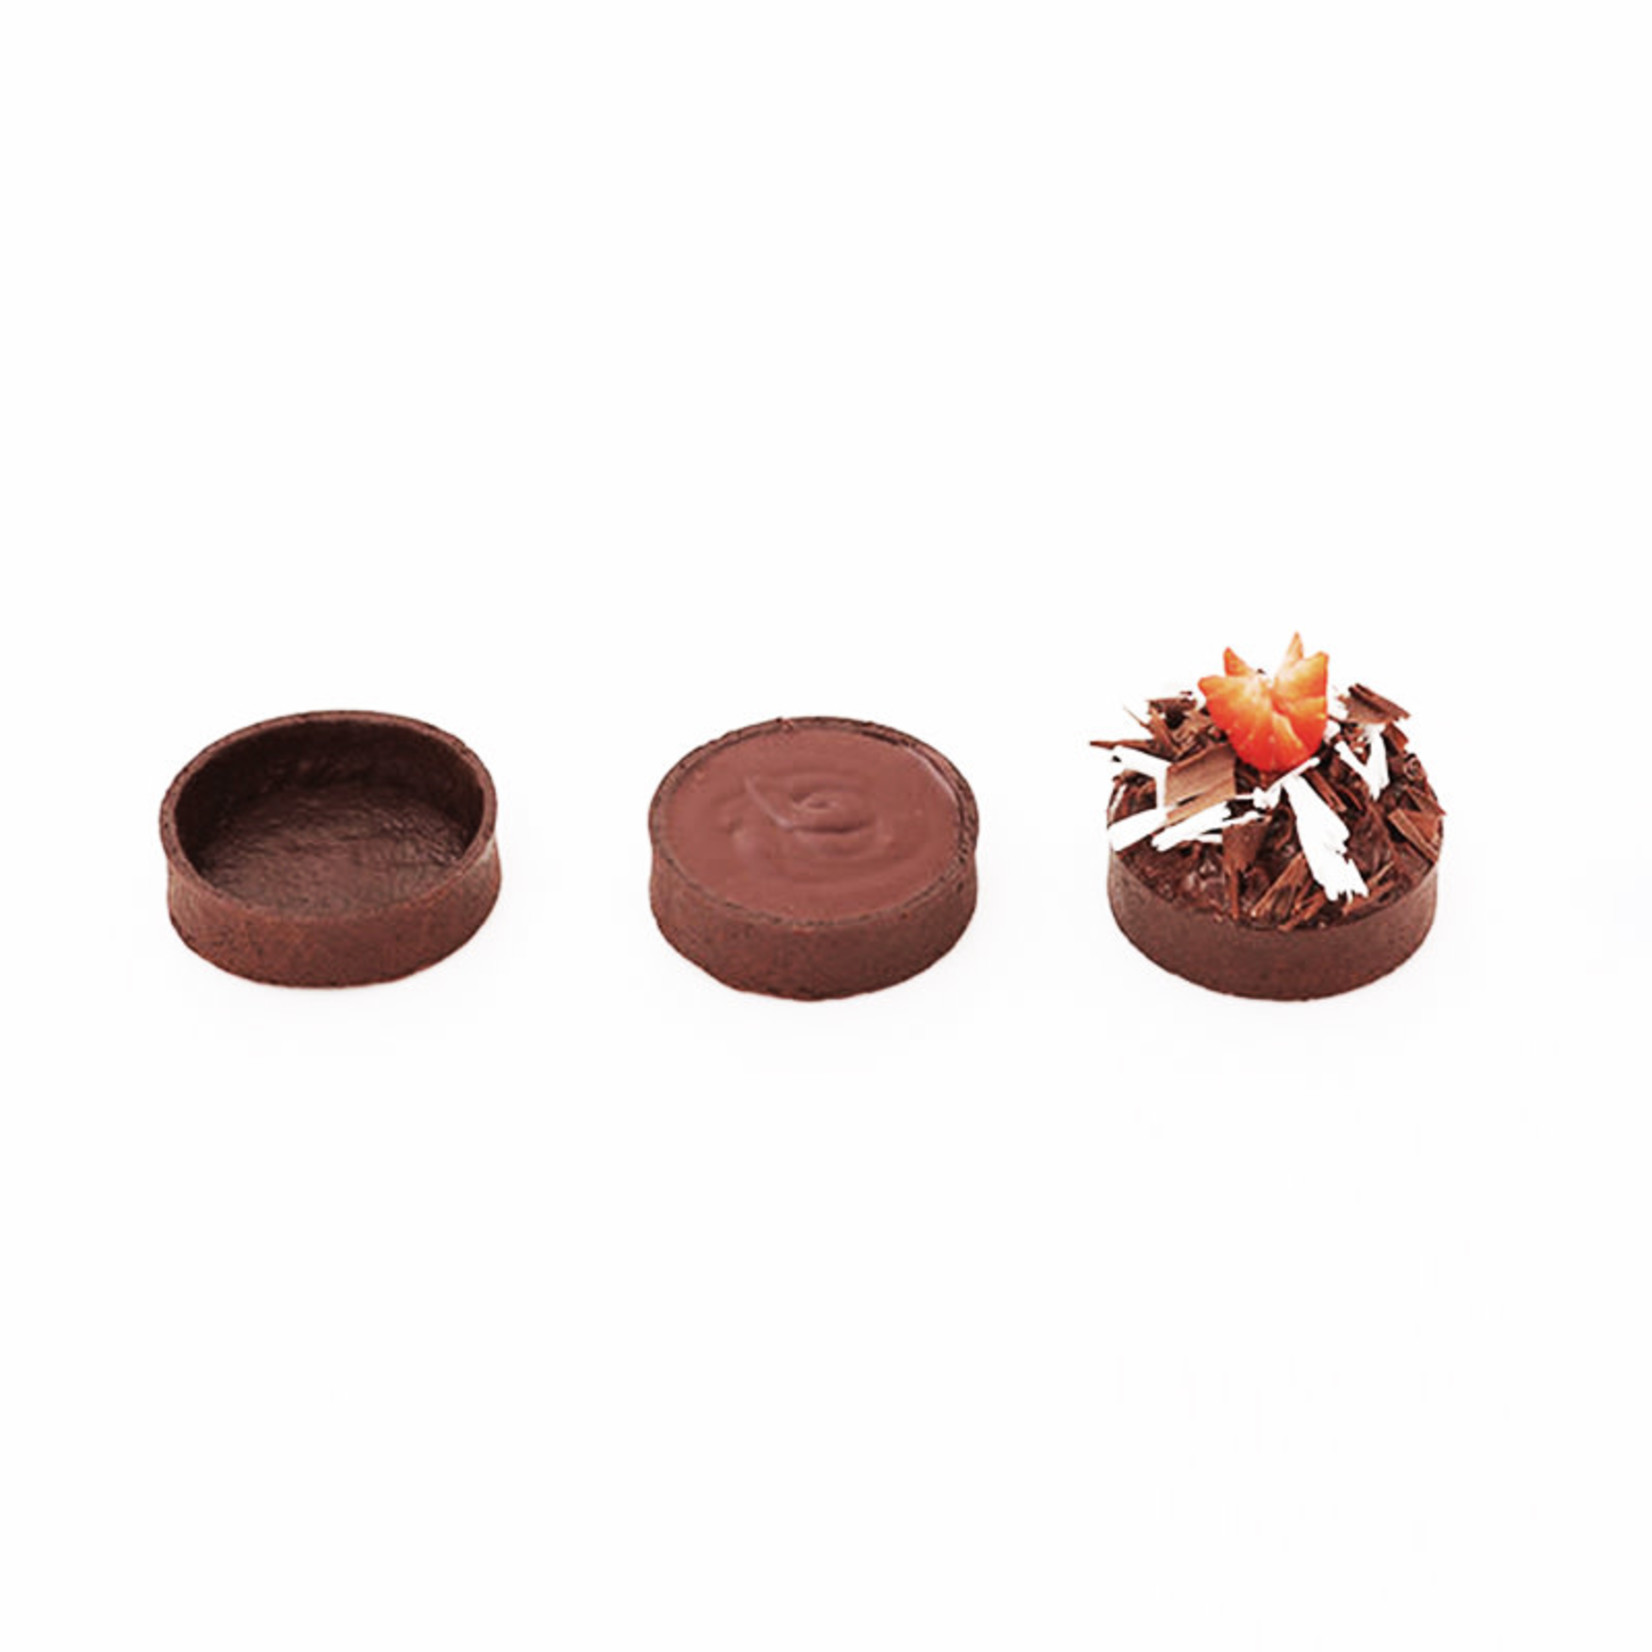 Le Chic Patissier Le Chic Patissier - Chocolate Round Tart shell - 2" (100 ct)